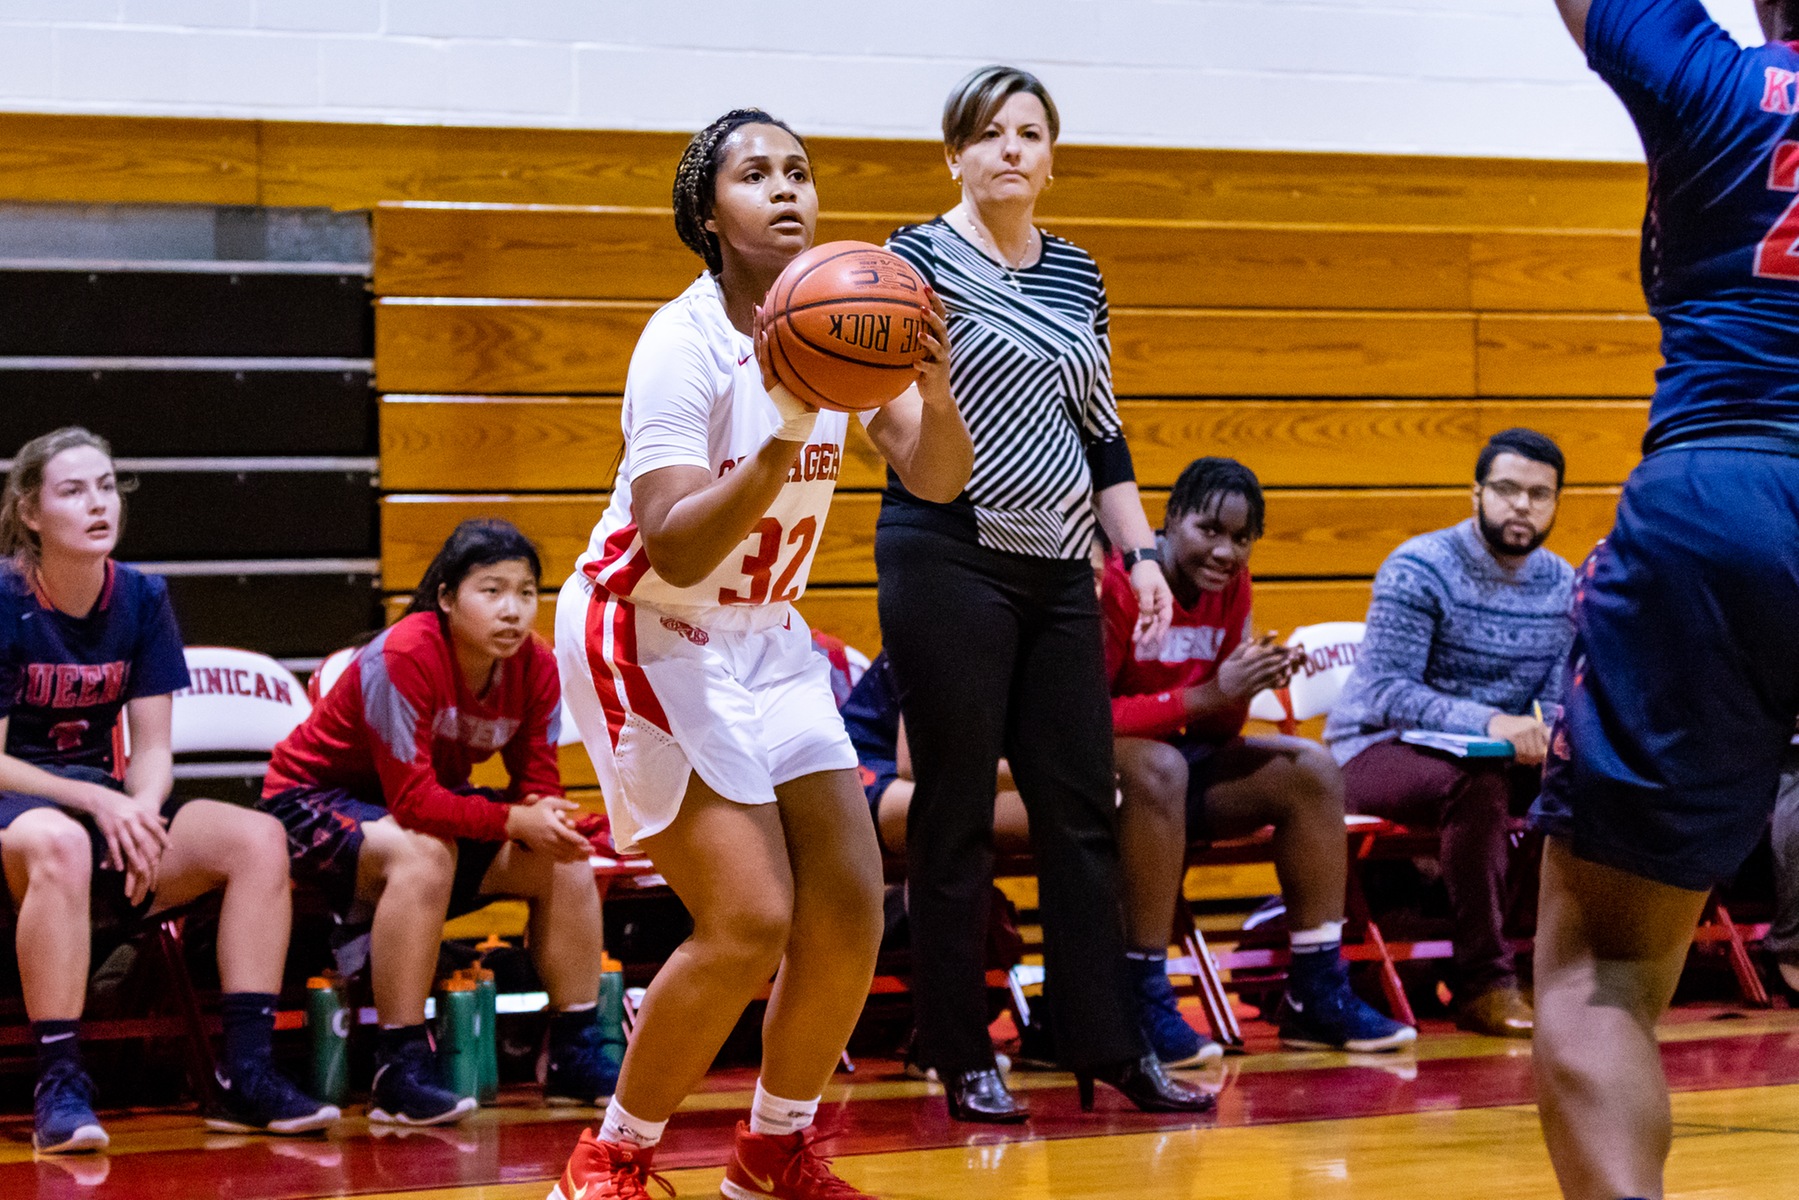 LADY CHARGERS EARN SECOND STRAIGHT WIN OVER RIVAL NYACK